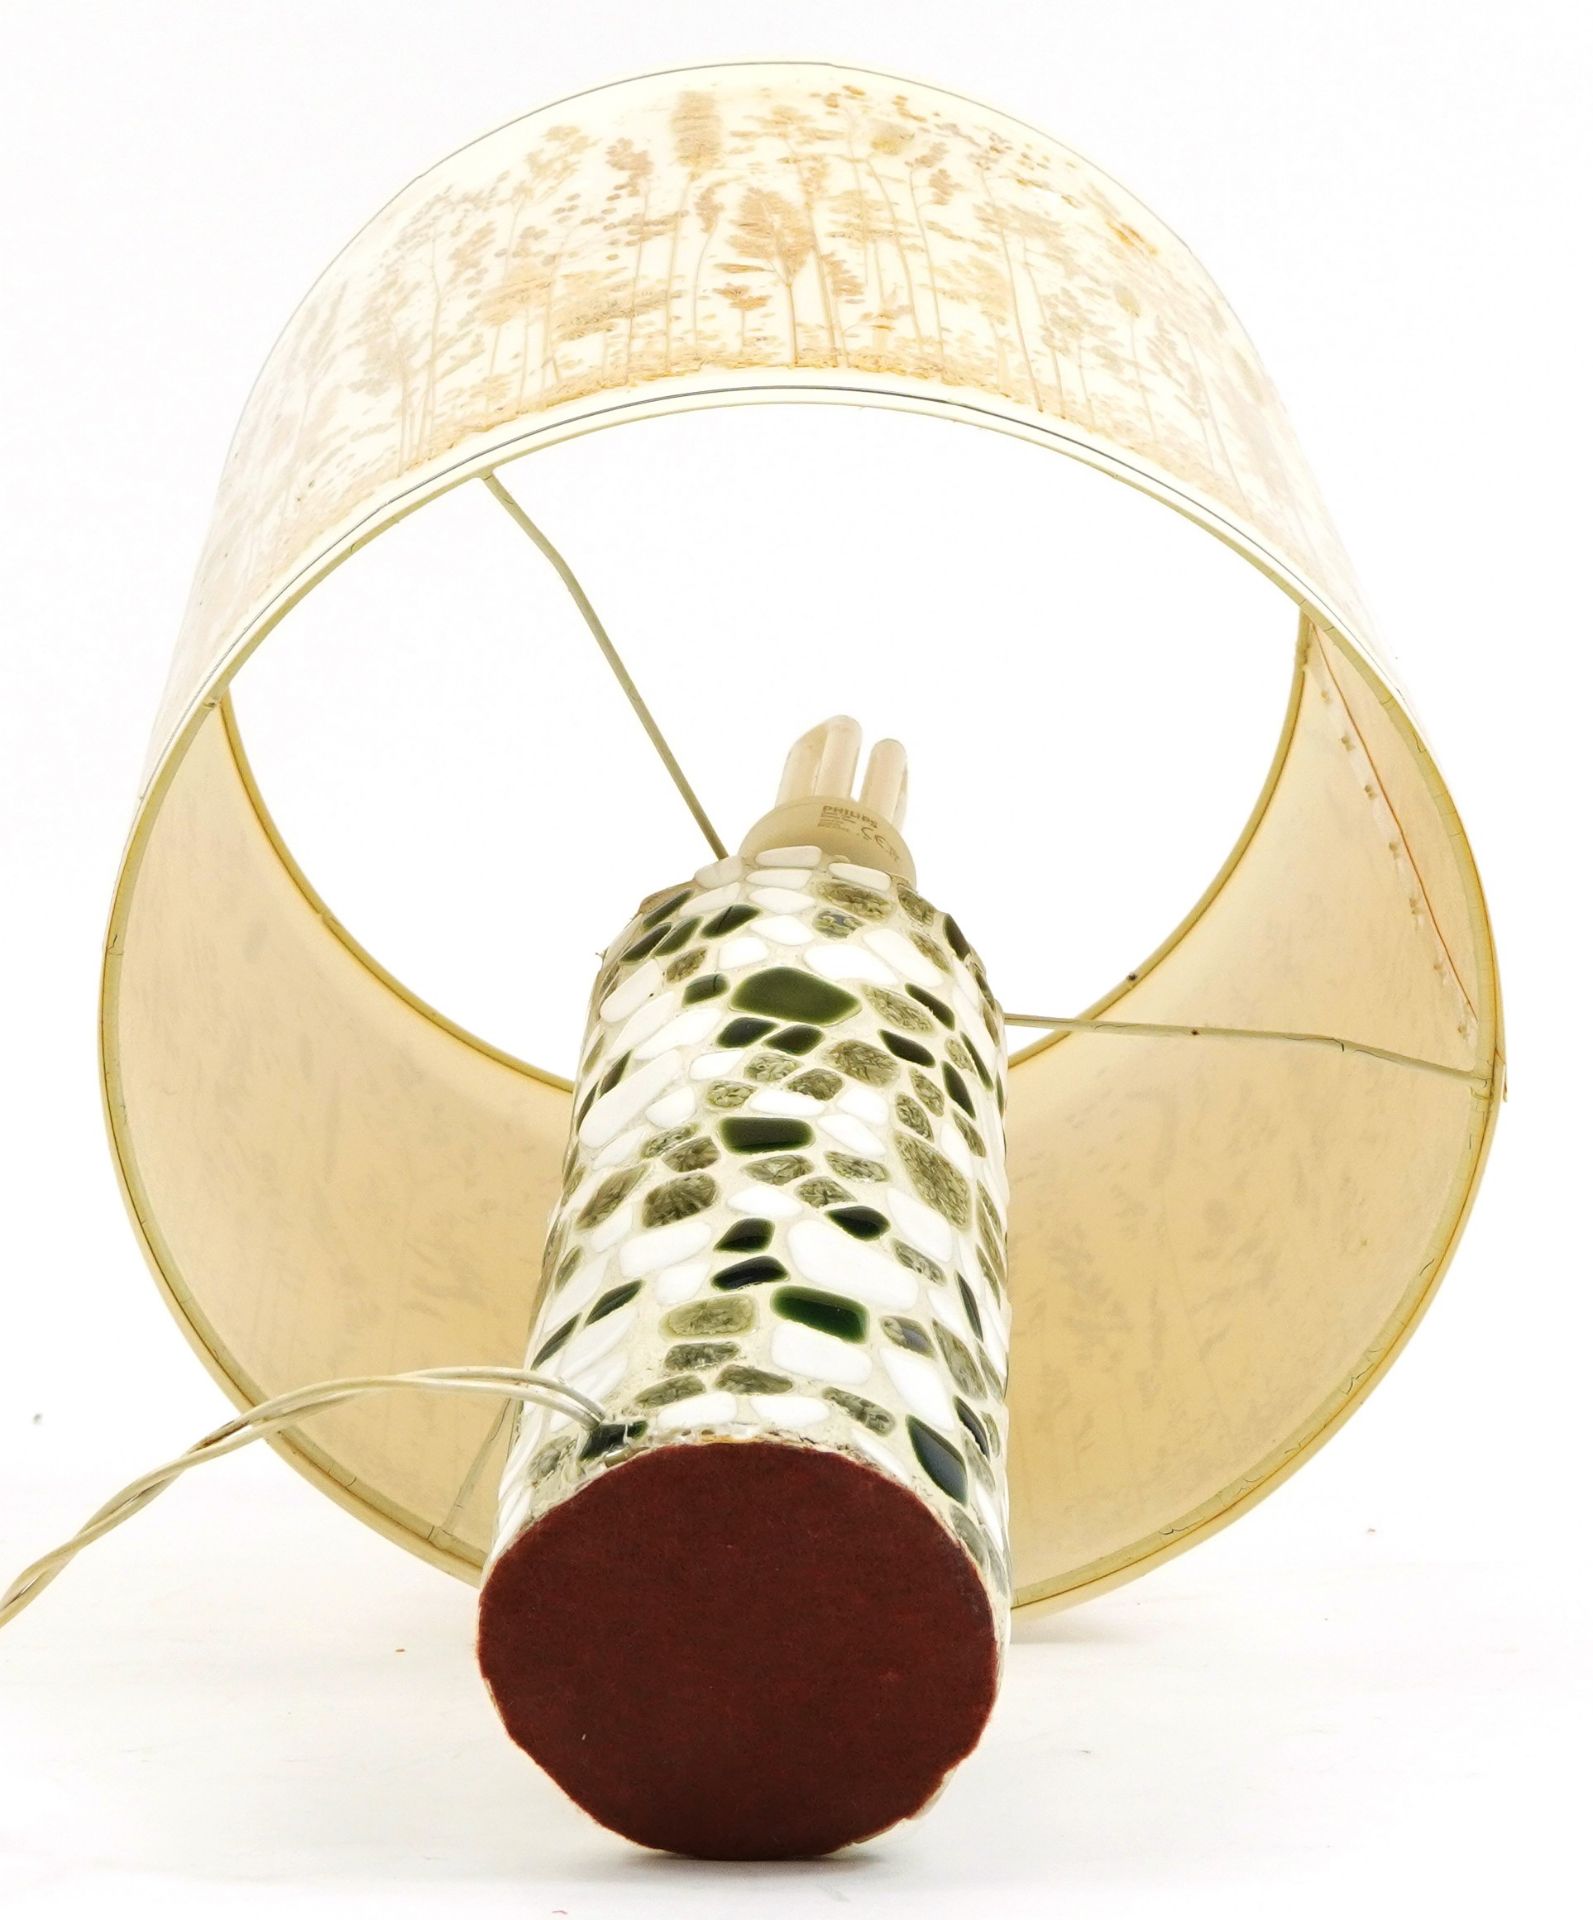 Vintage mosaic table lamp with original dried grass design shade, 52cm high - Image 3 of 3